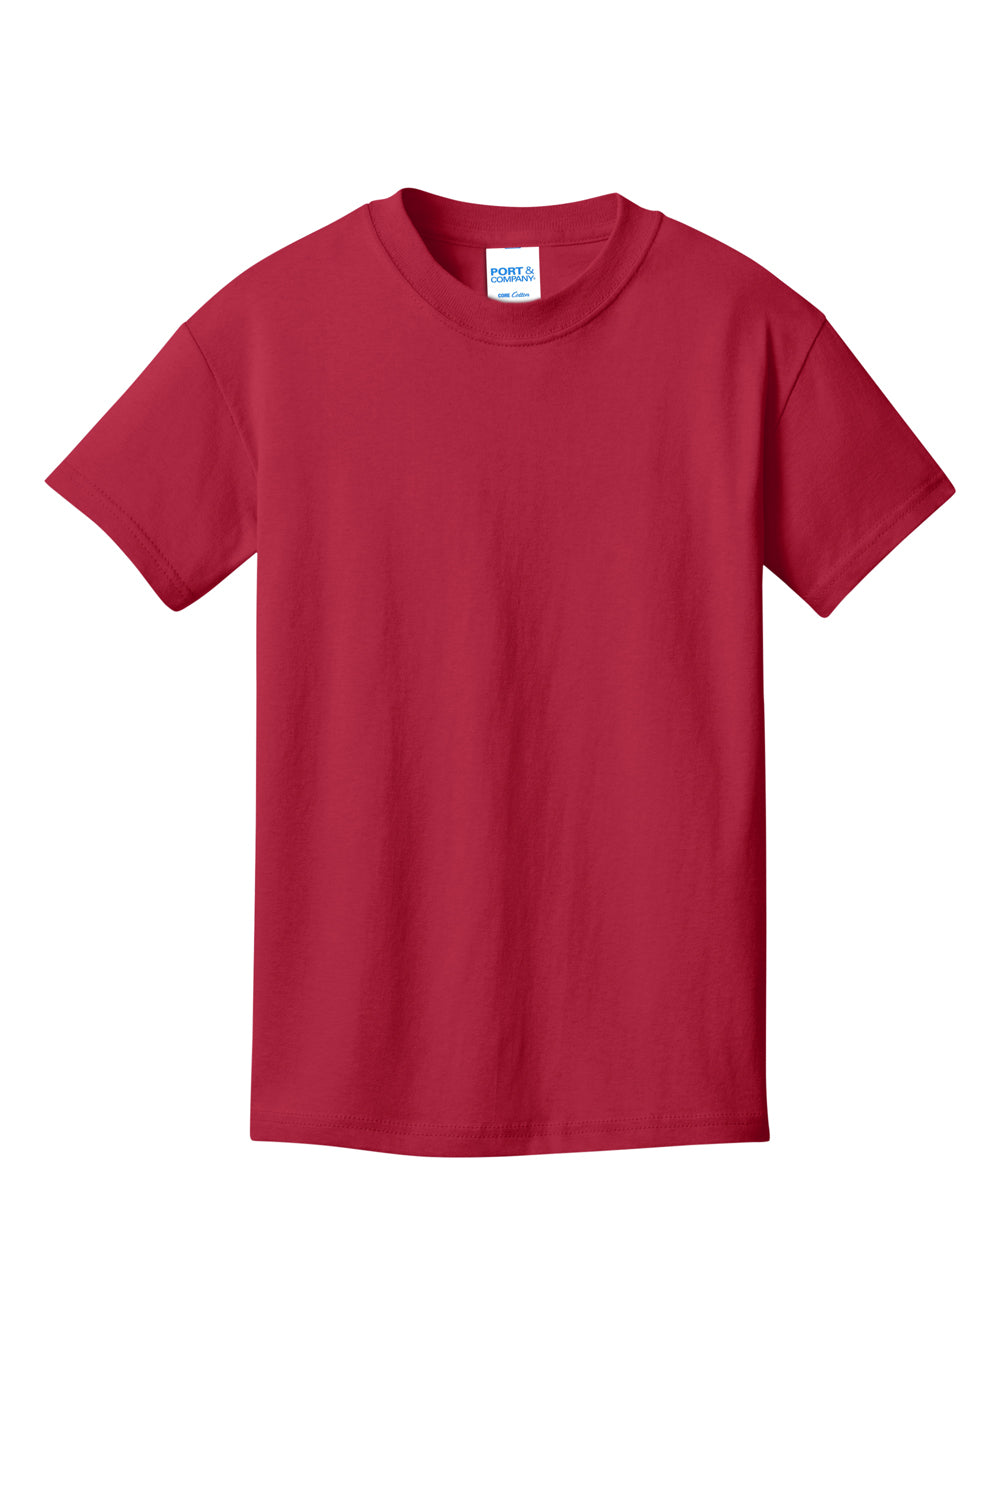 Port & Company PC54YDTG Core Cotton DTG Short Sleeve Crewneck T-Shirt Red Flat Front